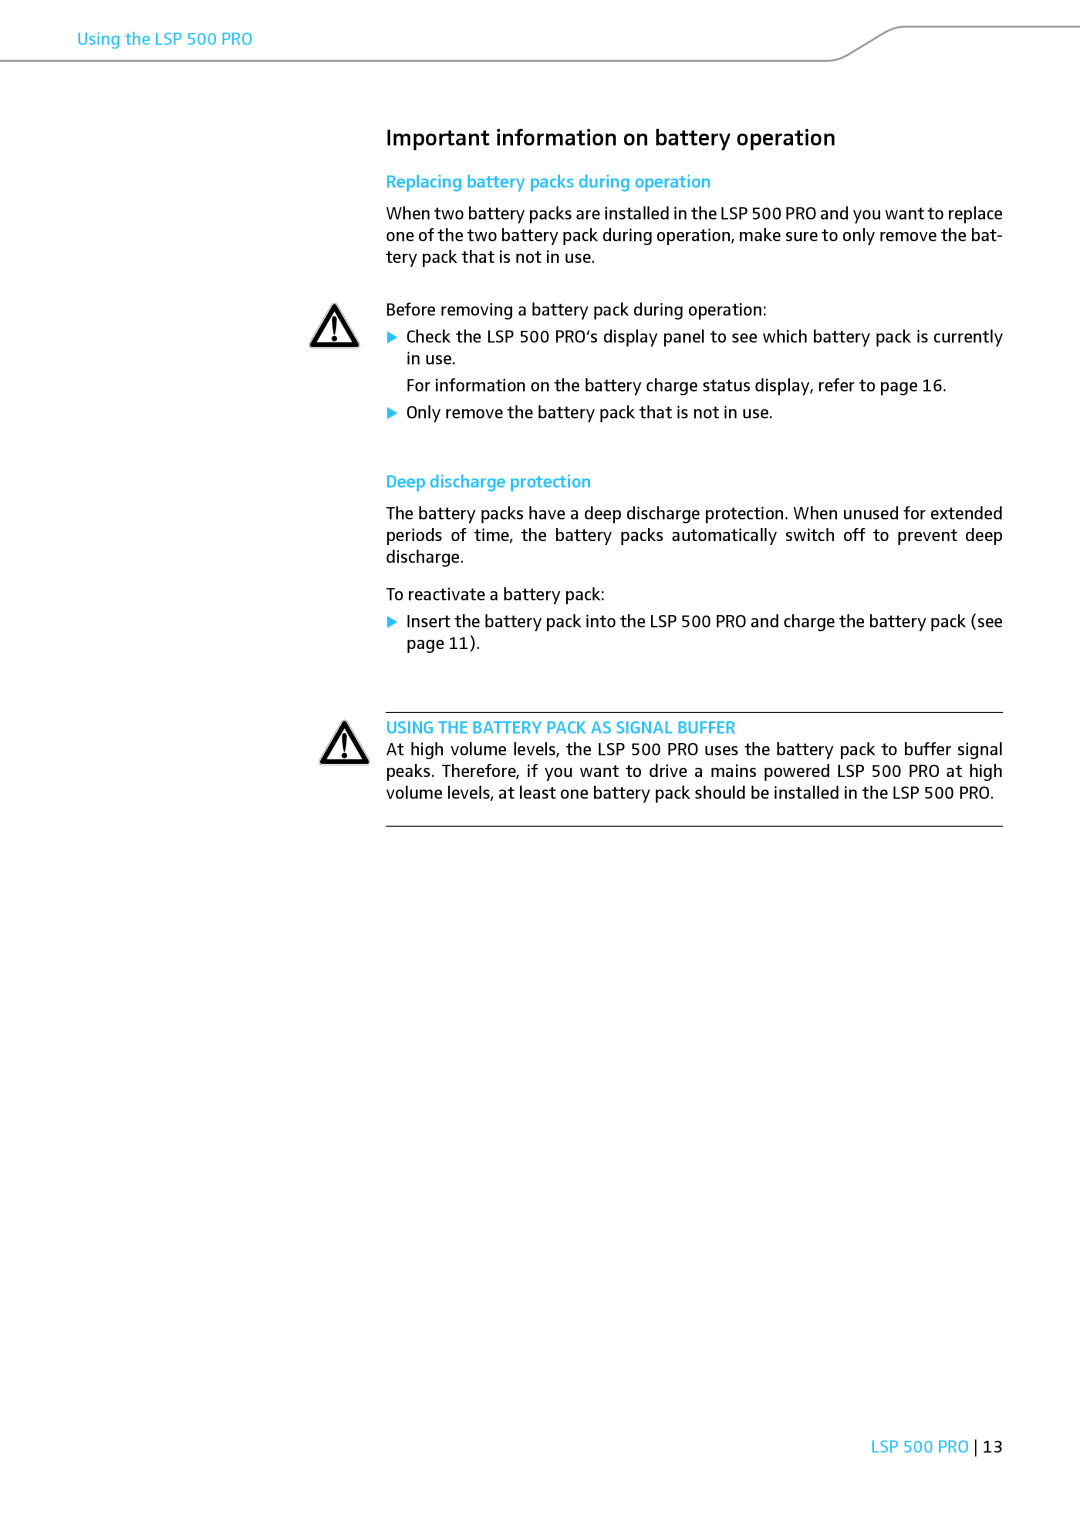 Sennheiser LSP 500 PRO Important information on battery operation, Replacing battery packs during operation 